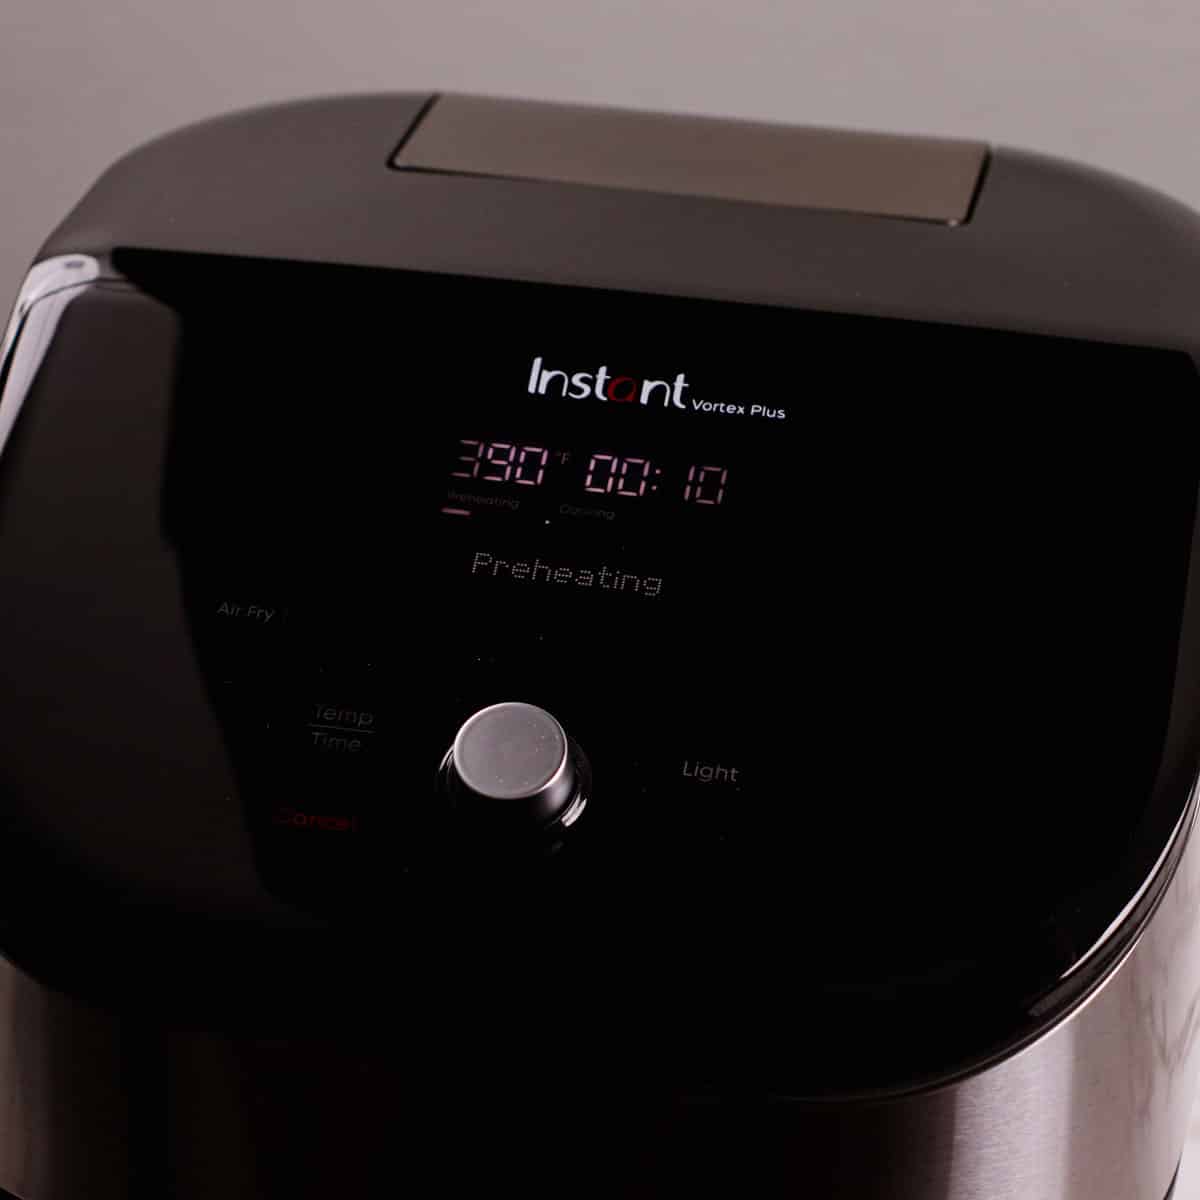 Preheating air fryer to 390°F.